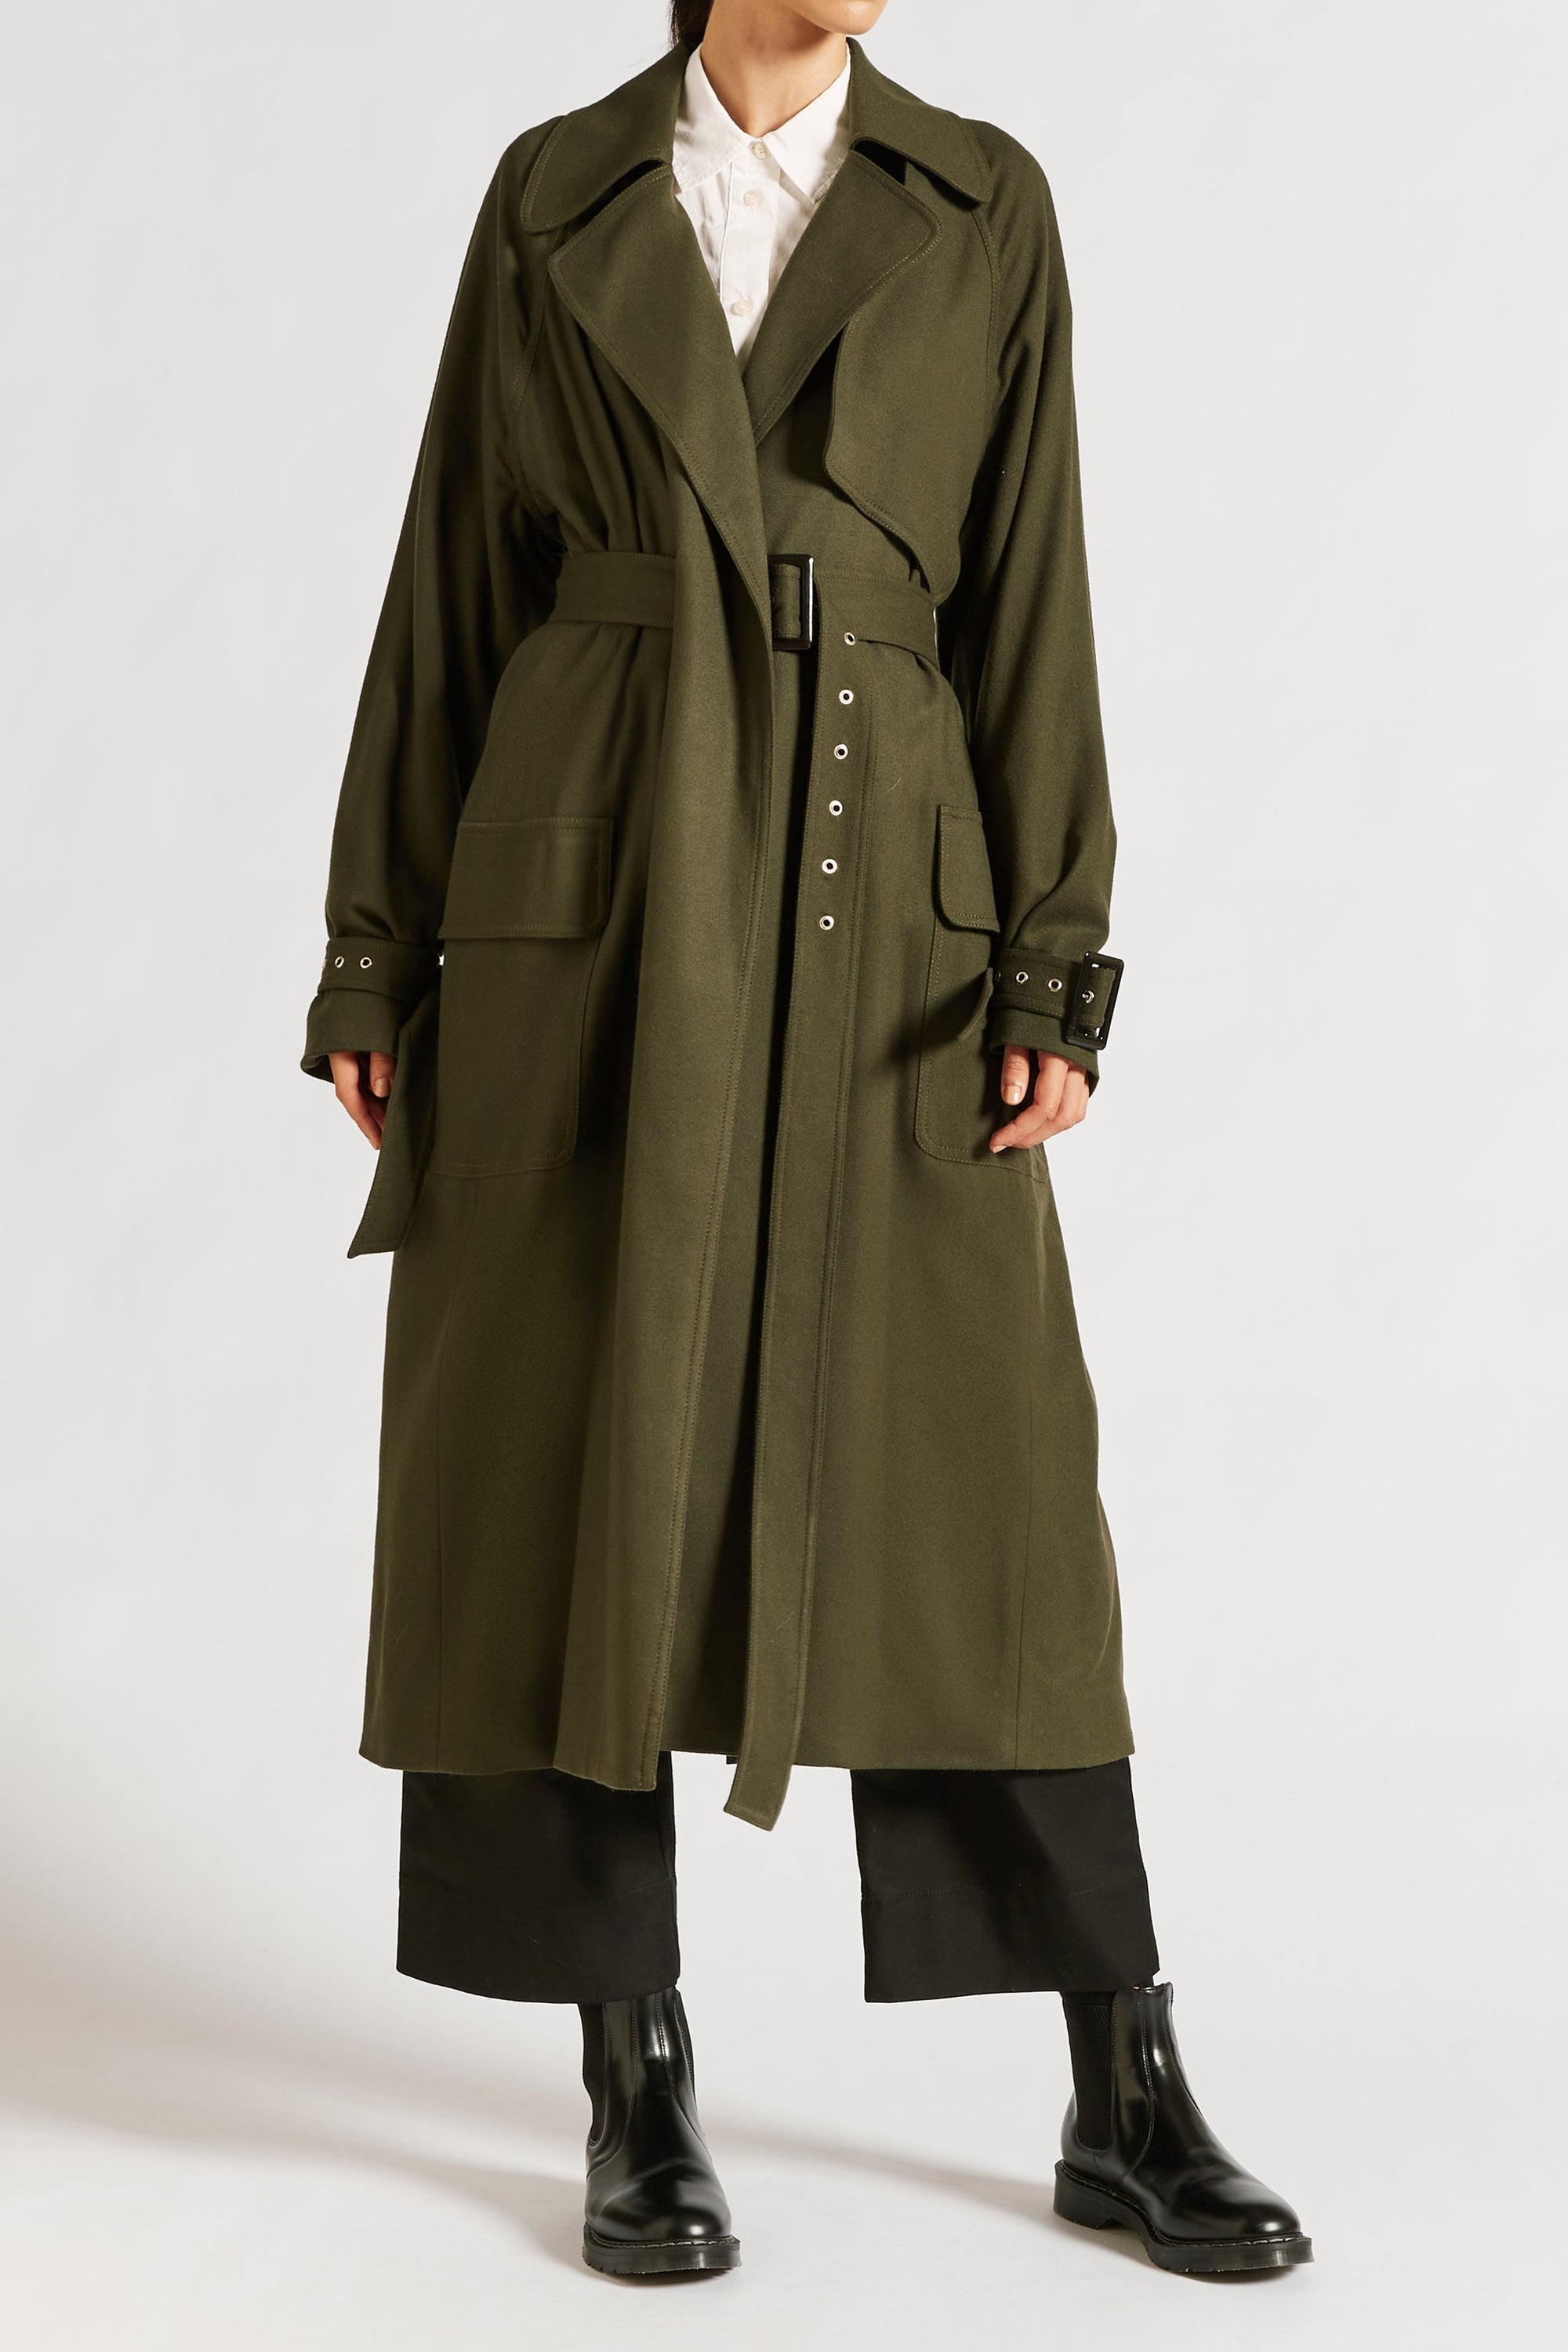 Lee Mathews | Logan Double Breasted Trench in Khaki